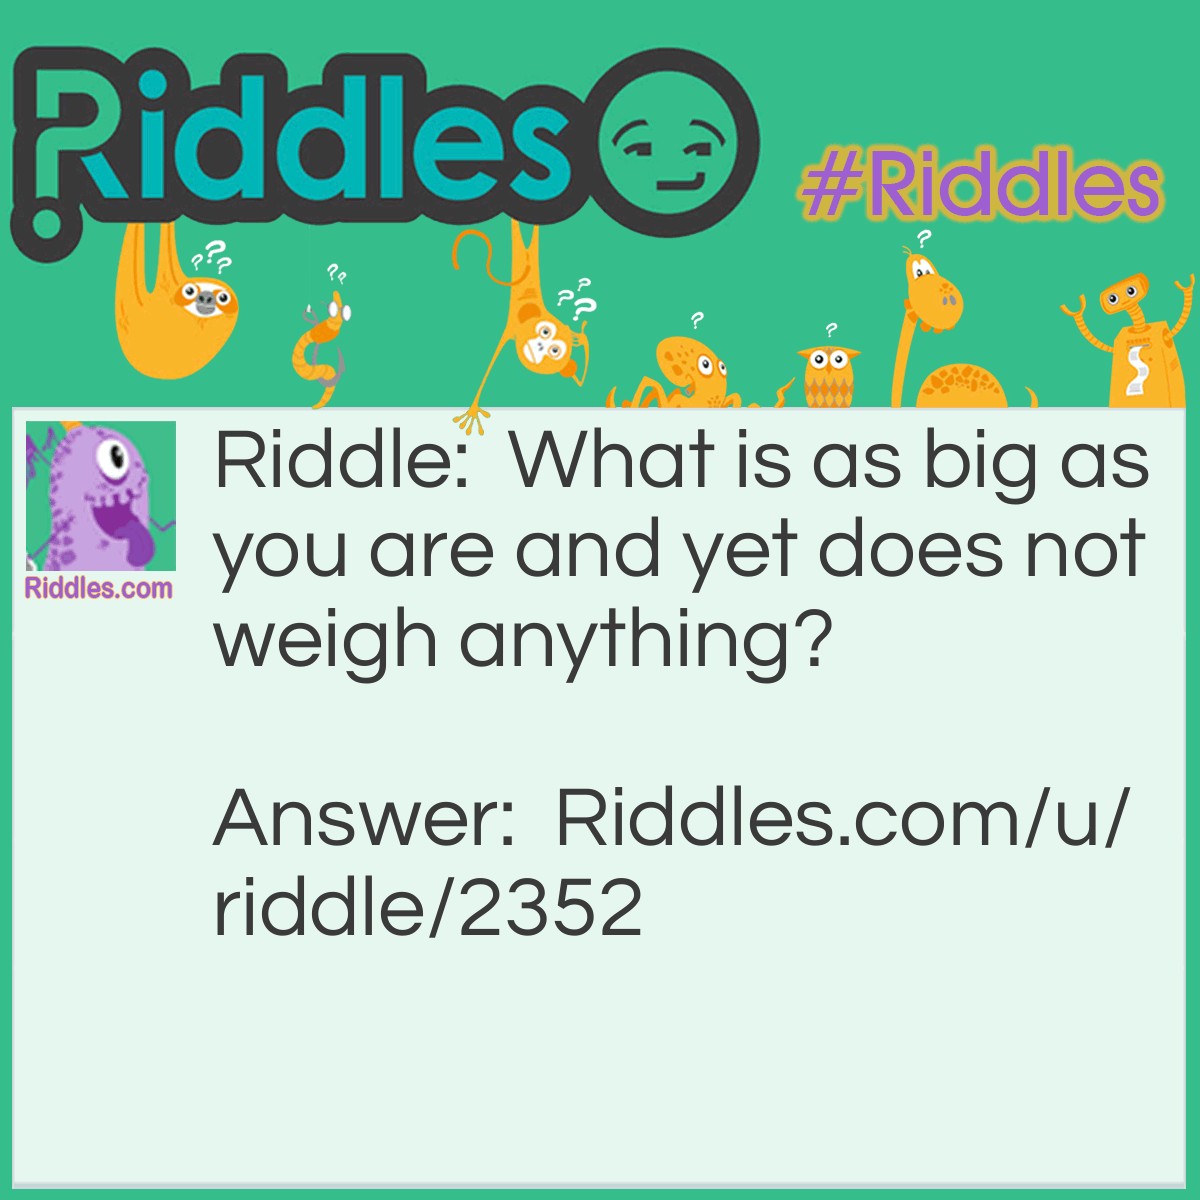 Riddle: What is as big as you are and yet does not weigh anything? Answer: Your shadow.